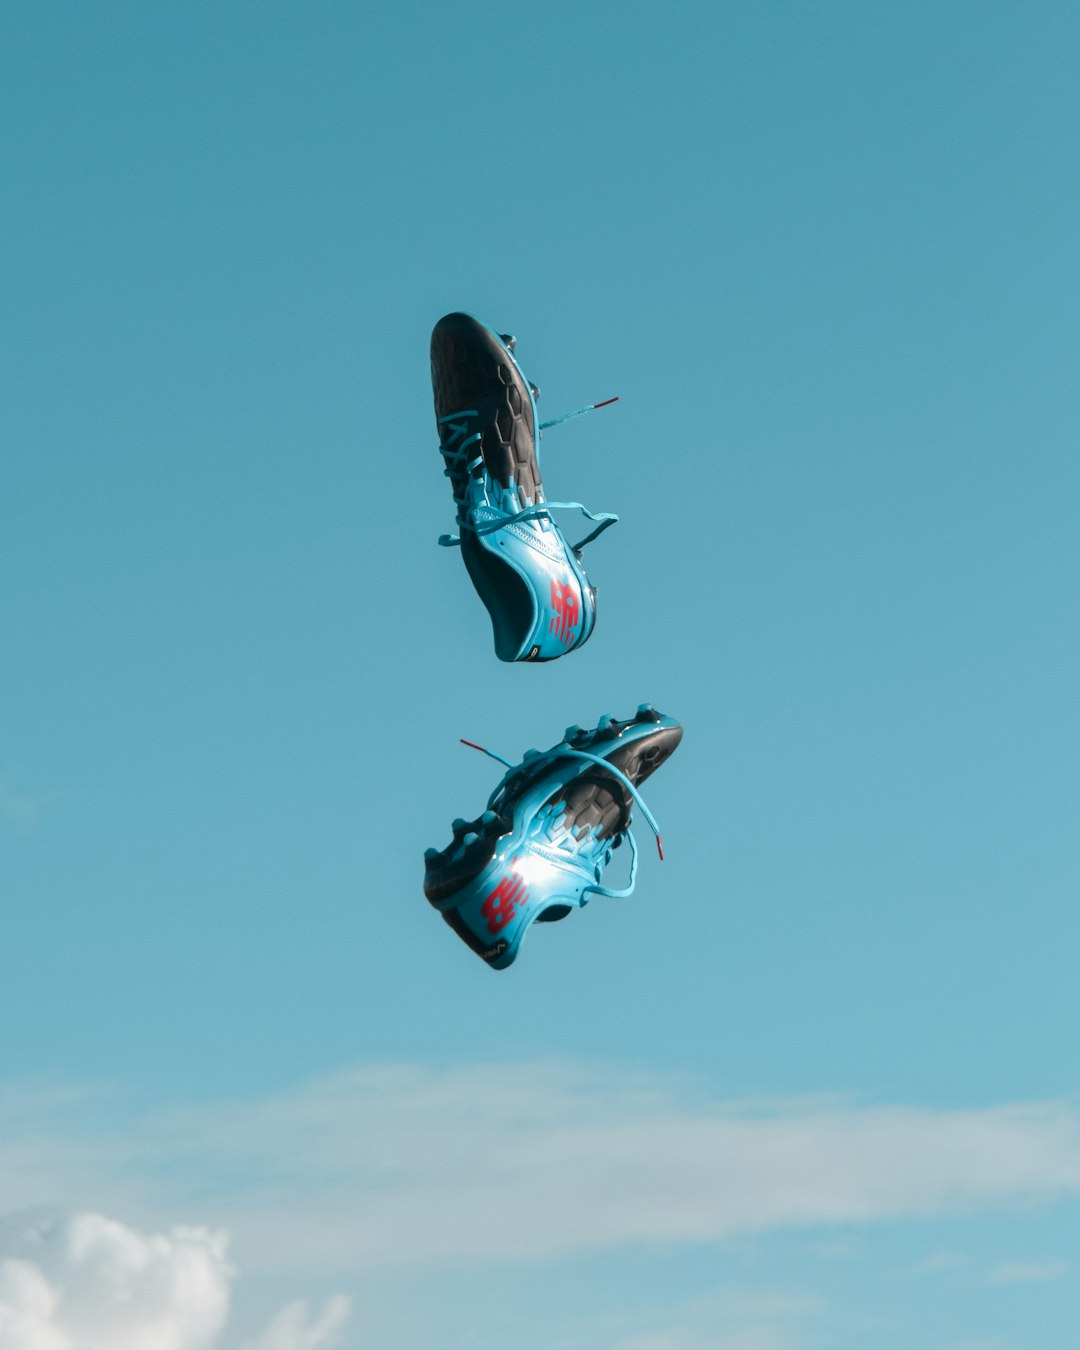 pair of blue-and-black New Balance cleats in the air under teal sky with white clouds